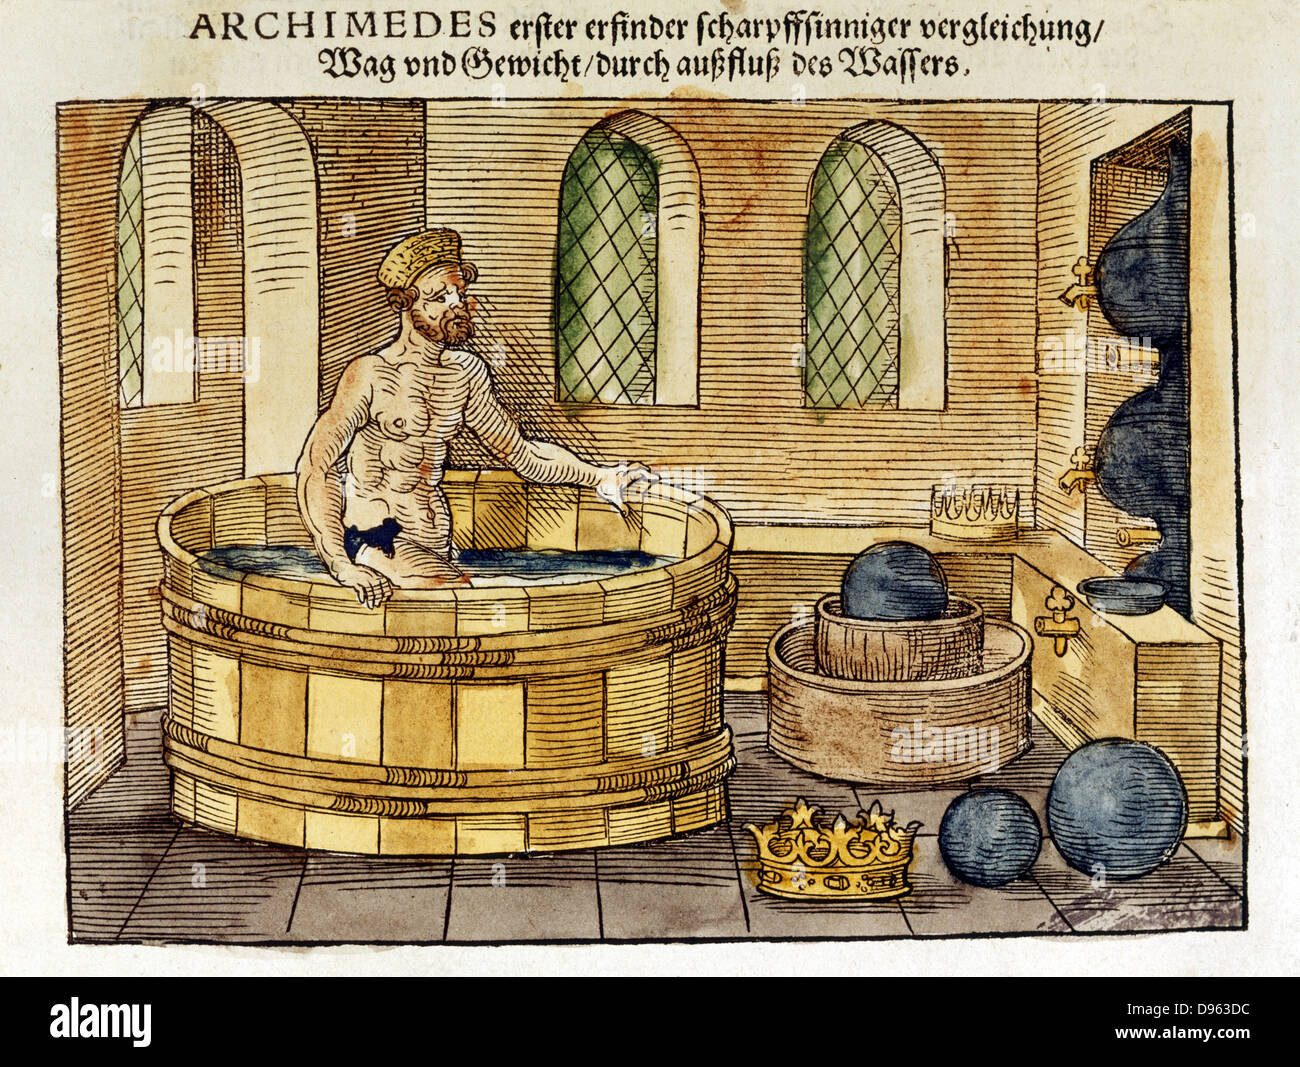 Archimedes (c287-212 BC) Greek mathematician and inventor, in his bath. Discovered formulae for calculating areas and volumes of plane and solid figures. Hydrostatics. Supposed to have shouted 'Eureka' on discovering principle of upthrust on a floating body. Hand-coloured woodcut, 1547. Stock Photo